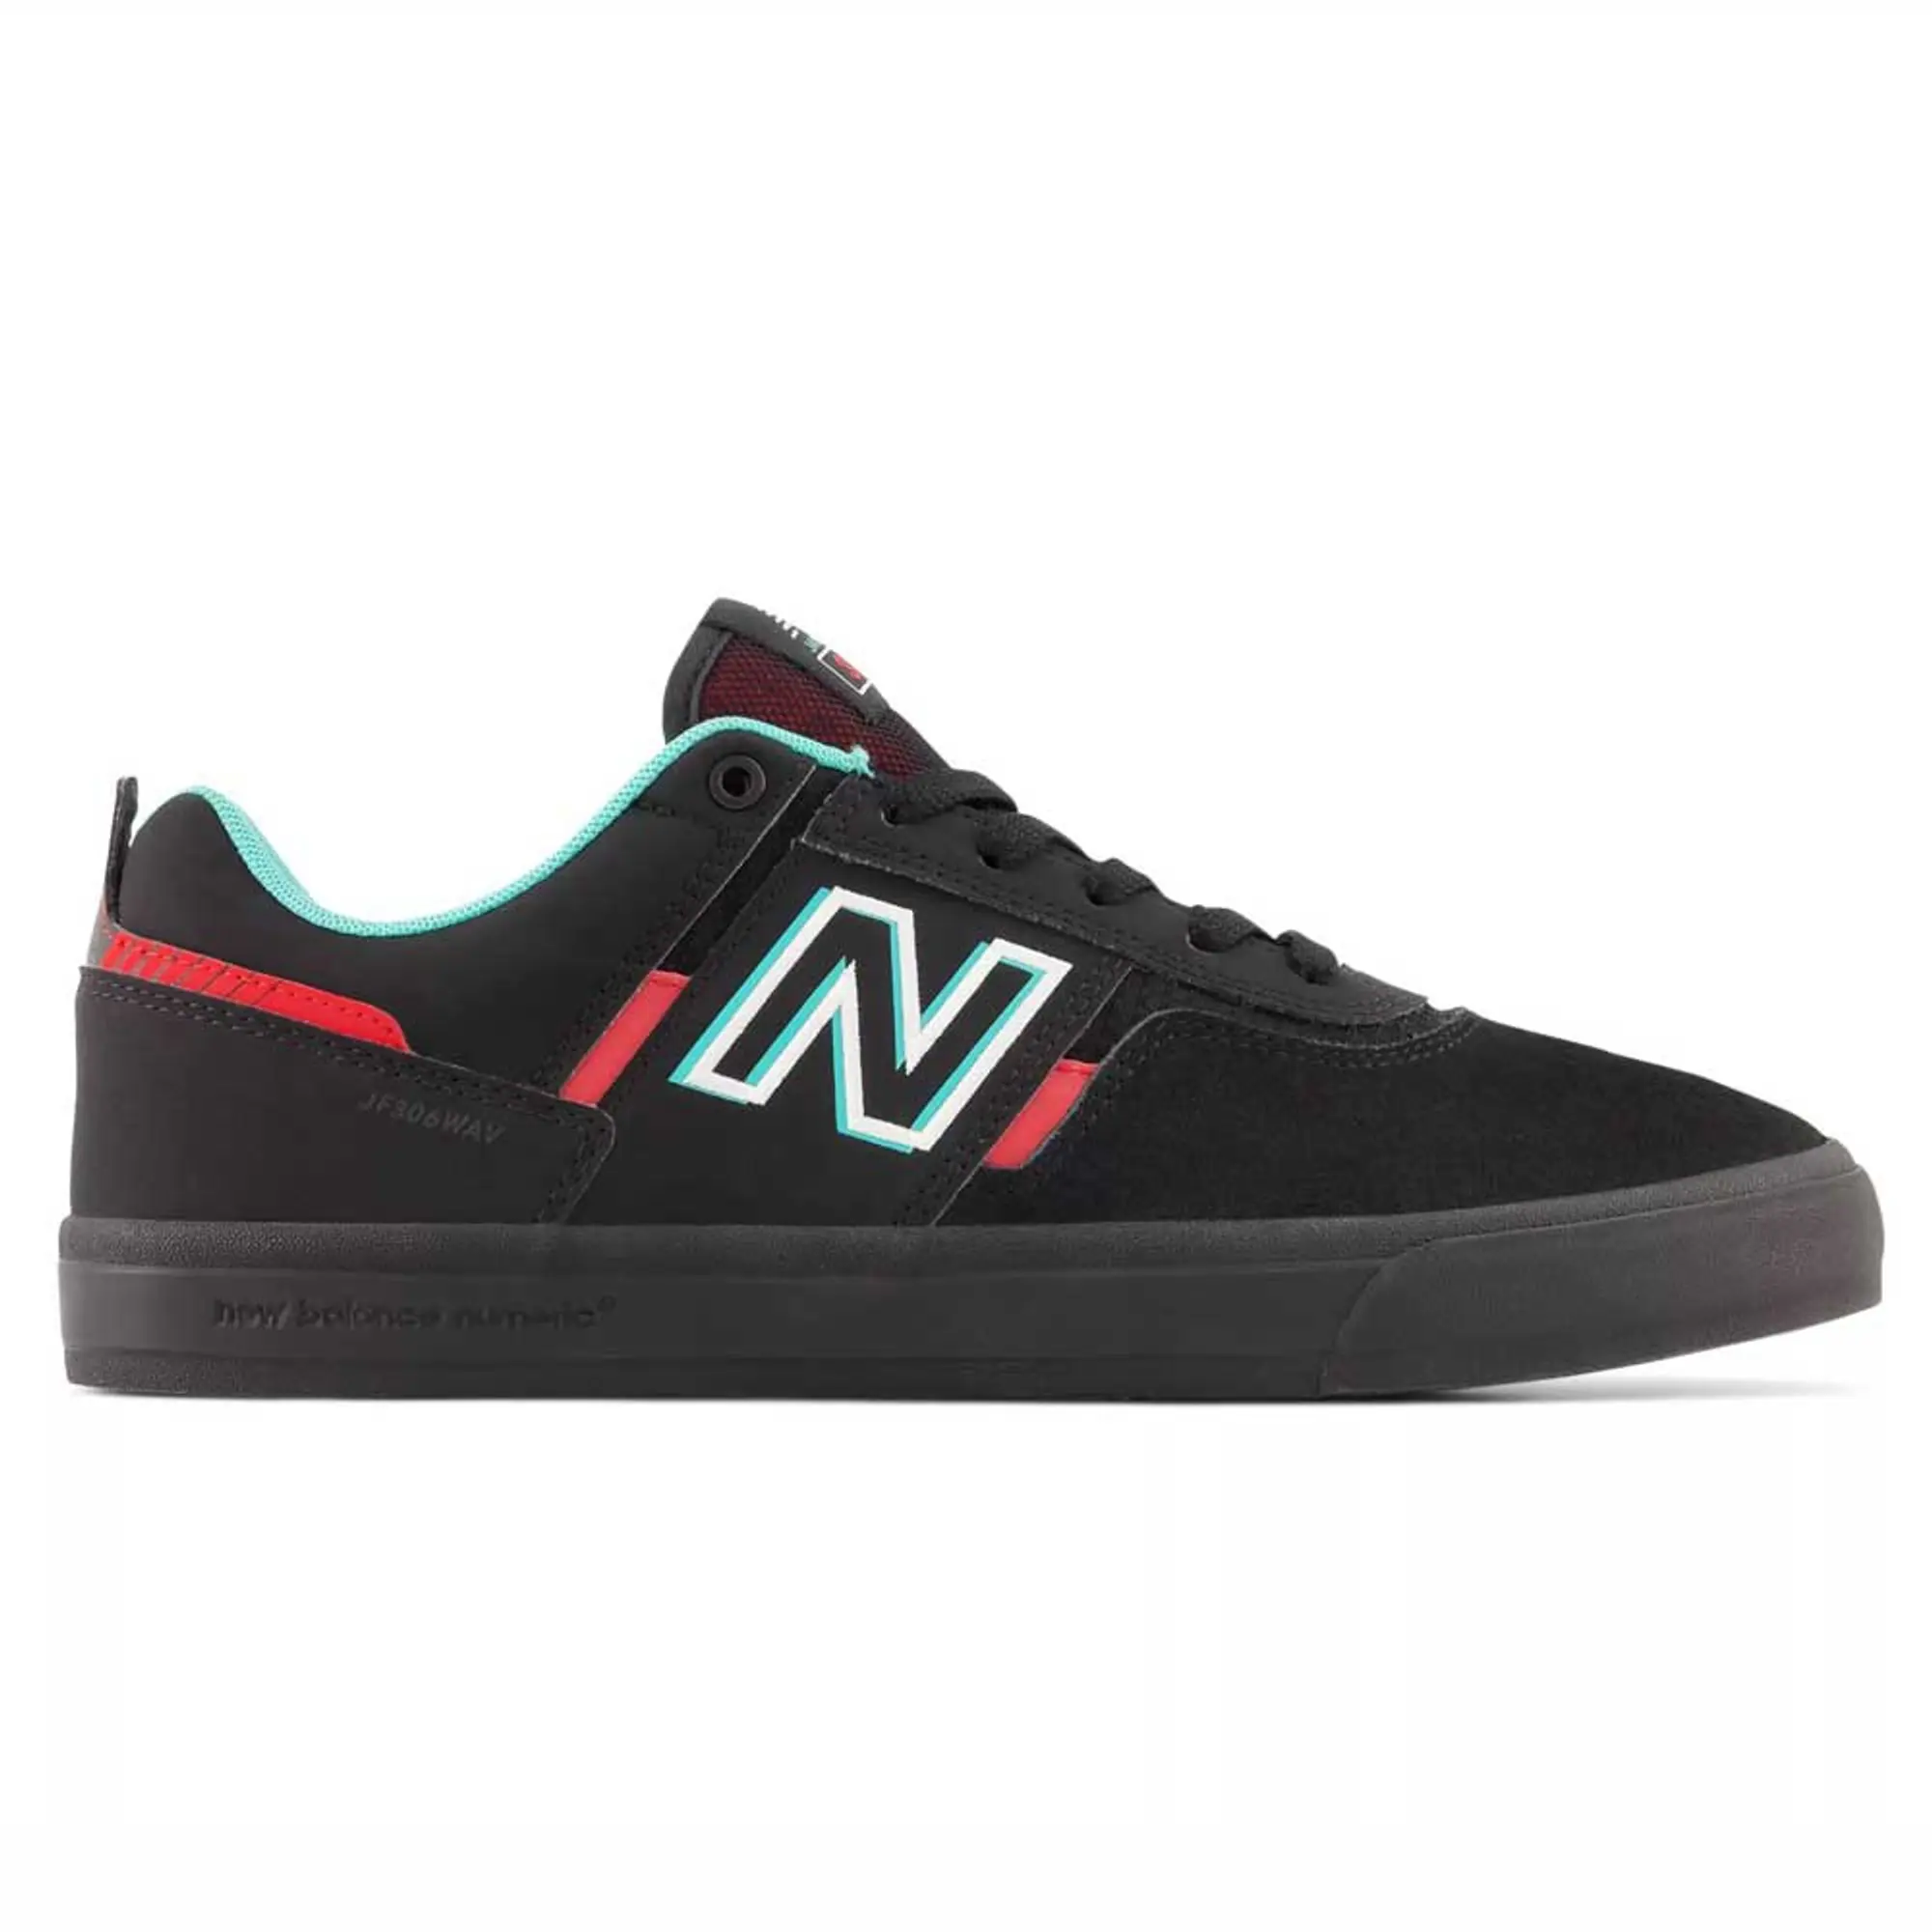 New Balance Men's NB Numeric Jamie Foy 306 in Black/Red Suede/Mesh